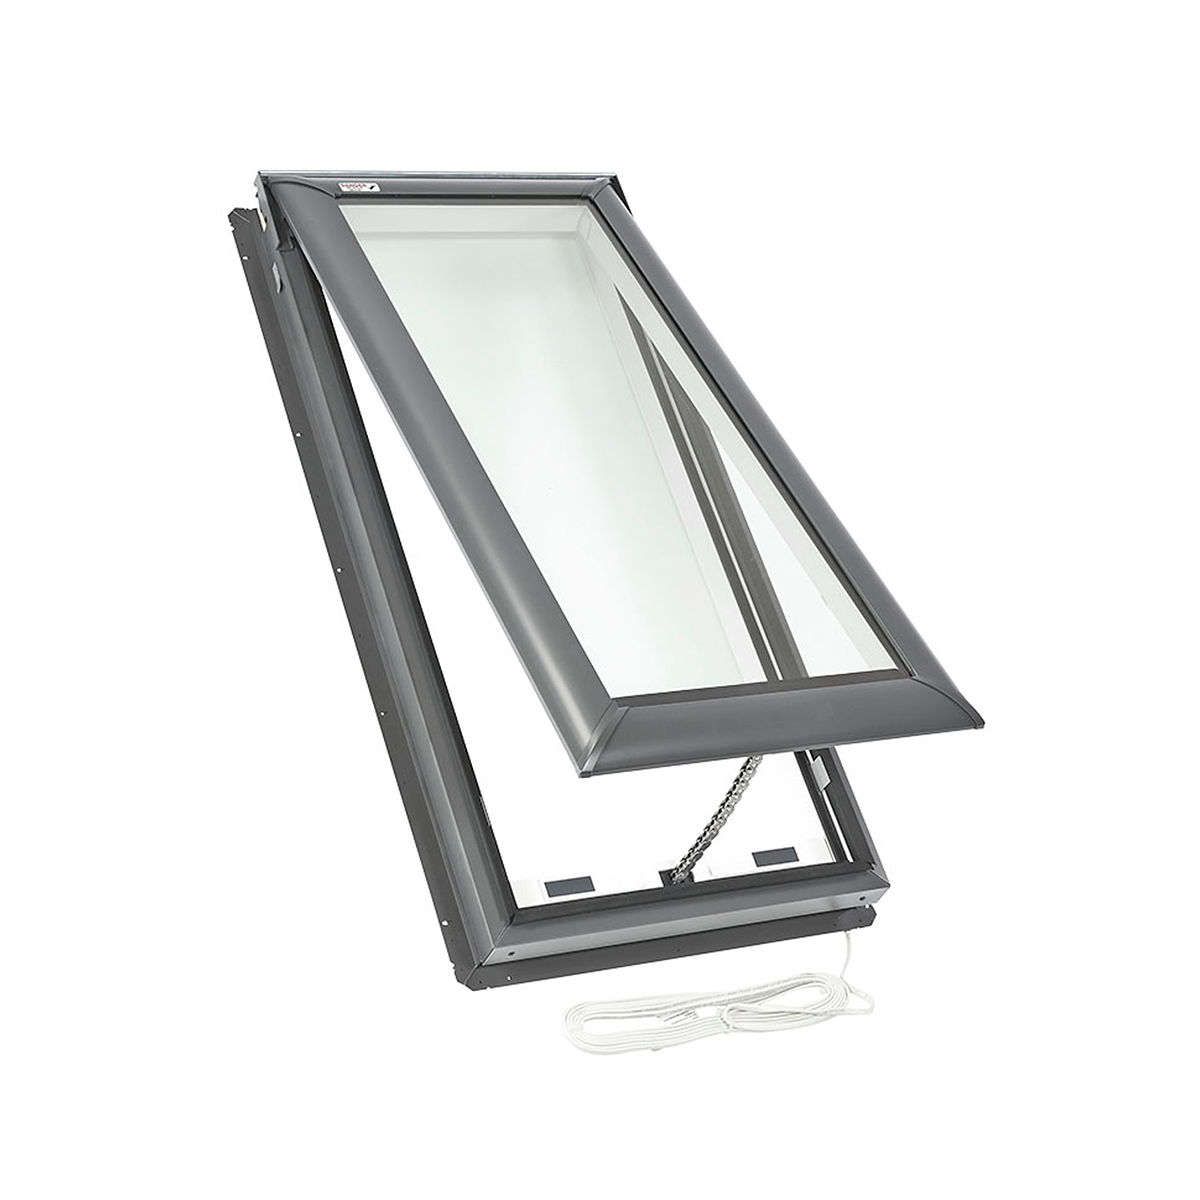 Electric Deck-Mount Skylight with Laminated Low-E3 Glass - 21 in. x 26-7/8 in. - VSE C01